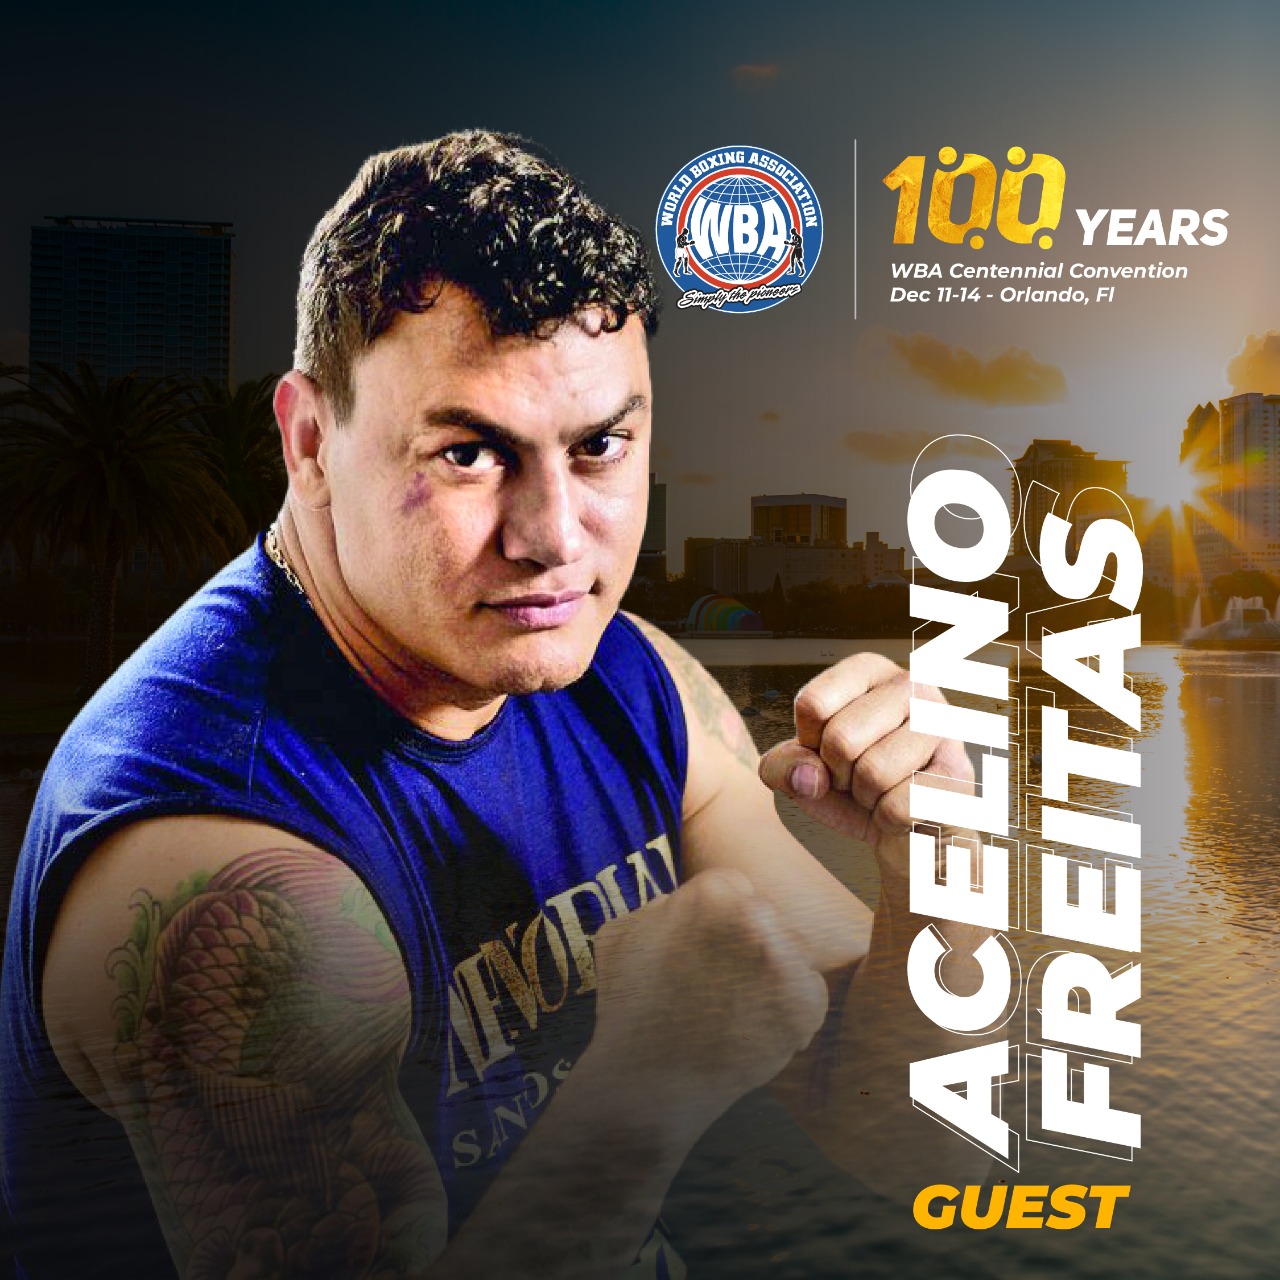 Acelino Freitas will also be at the WBA Convention